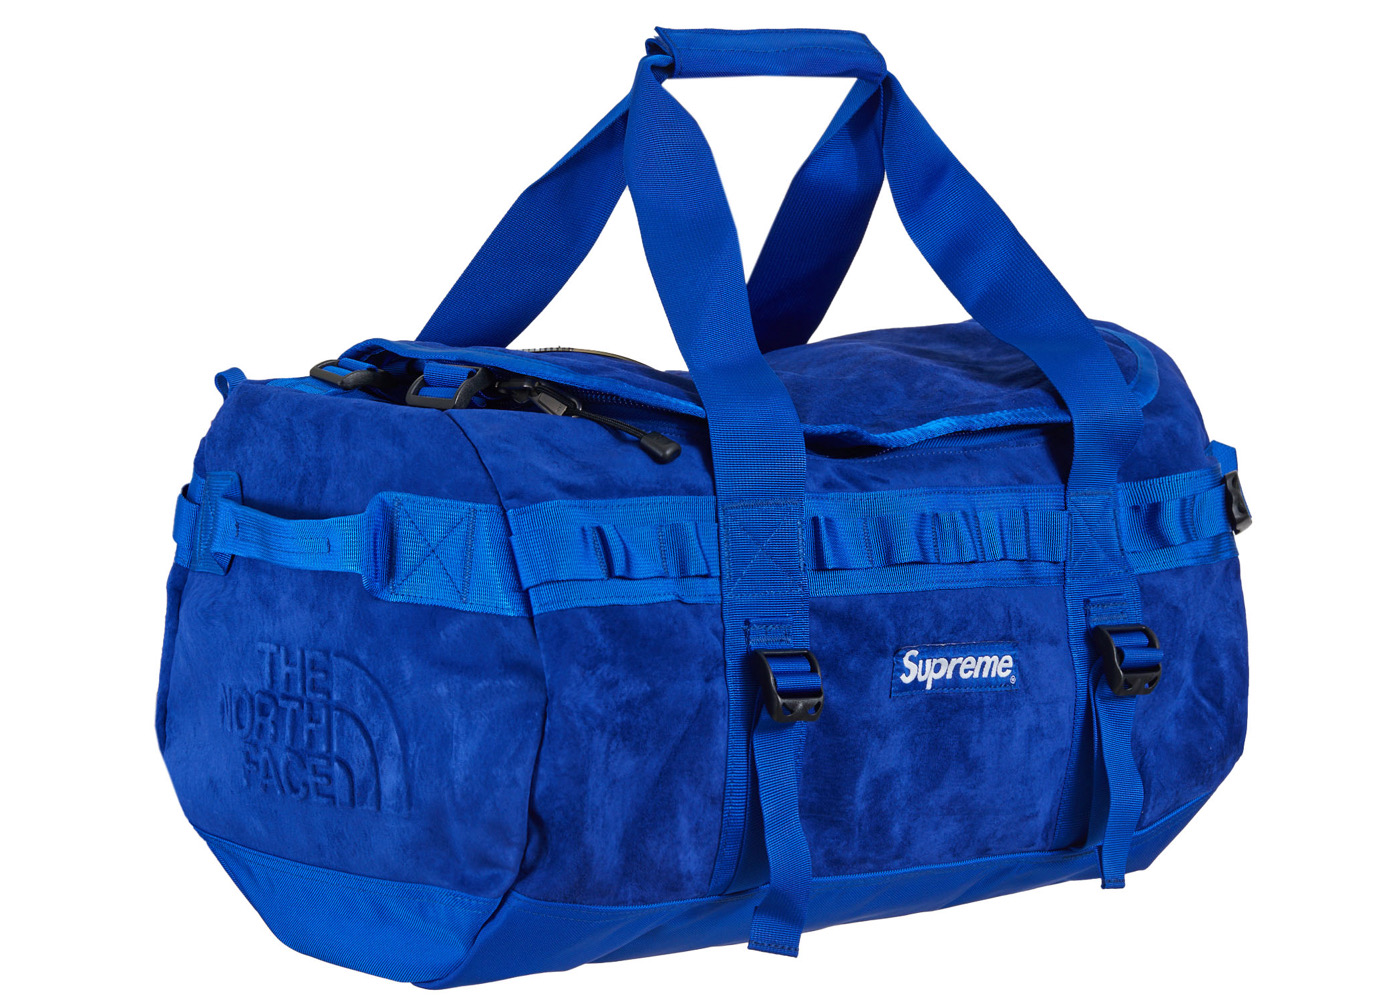 Supreme × The North Face  Duffle Bag